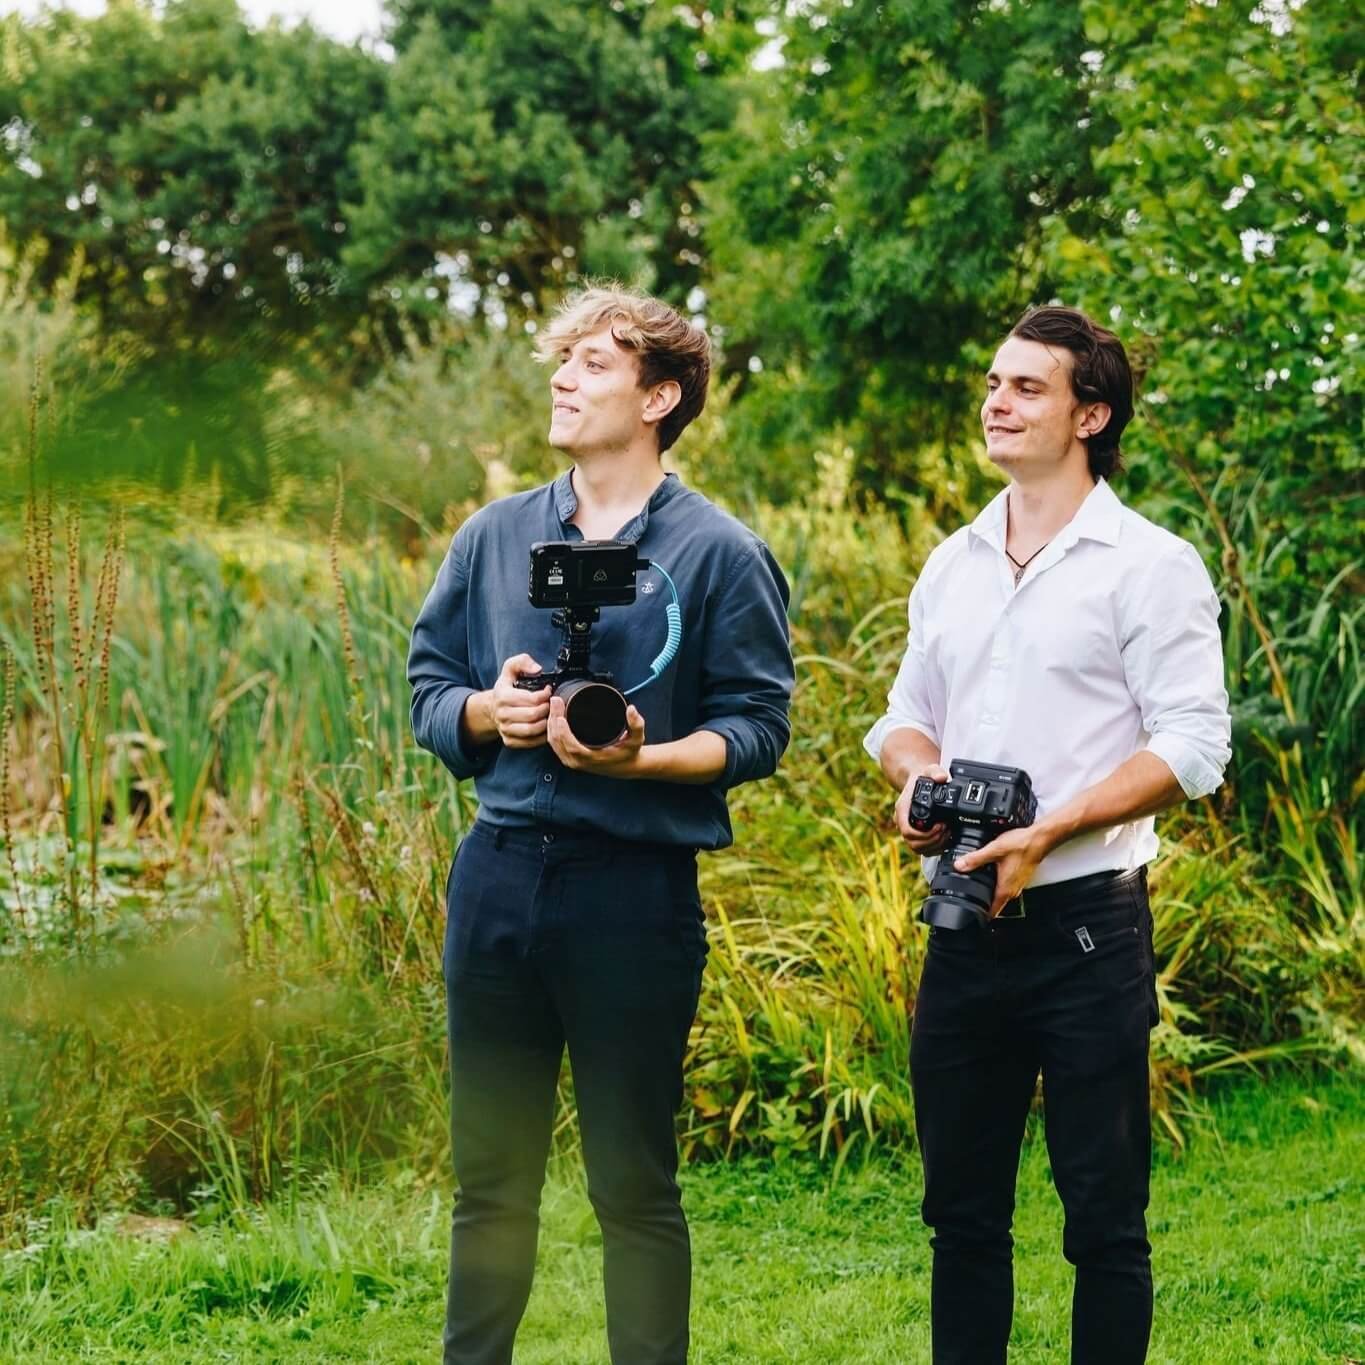  Chris and best friend Luke standing holding video cameras at wedding 